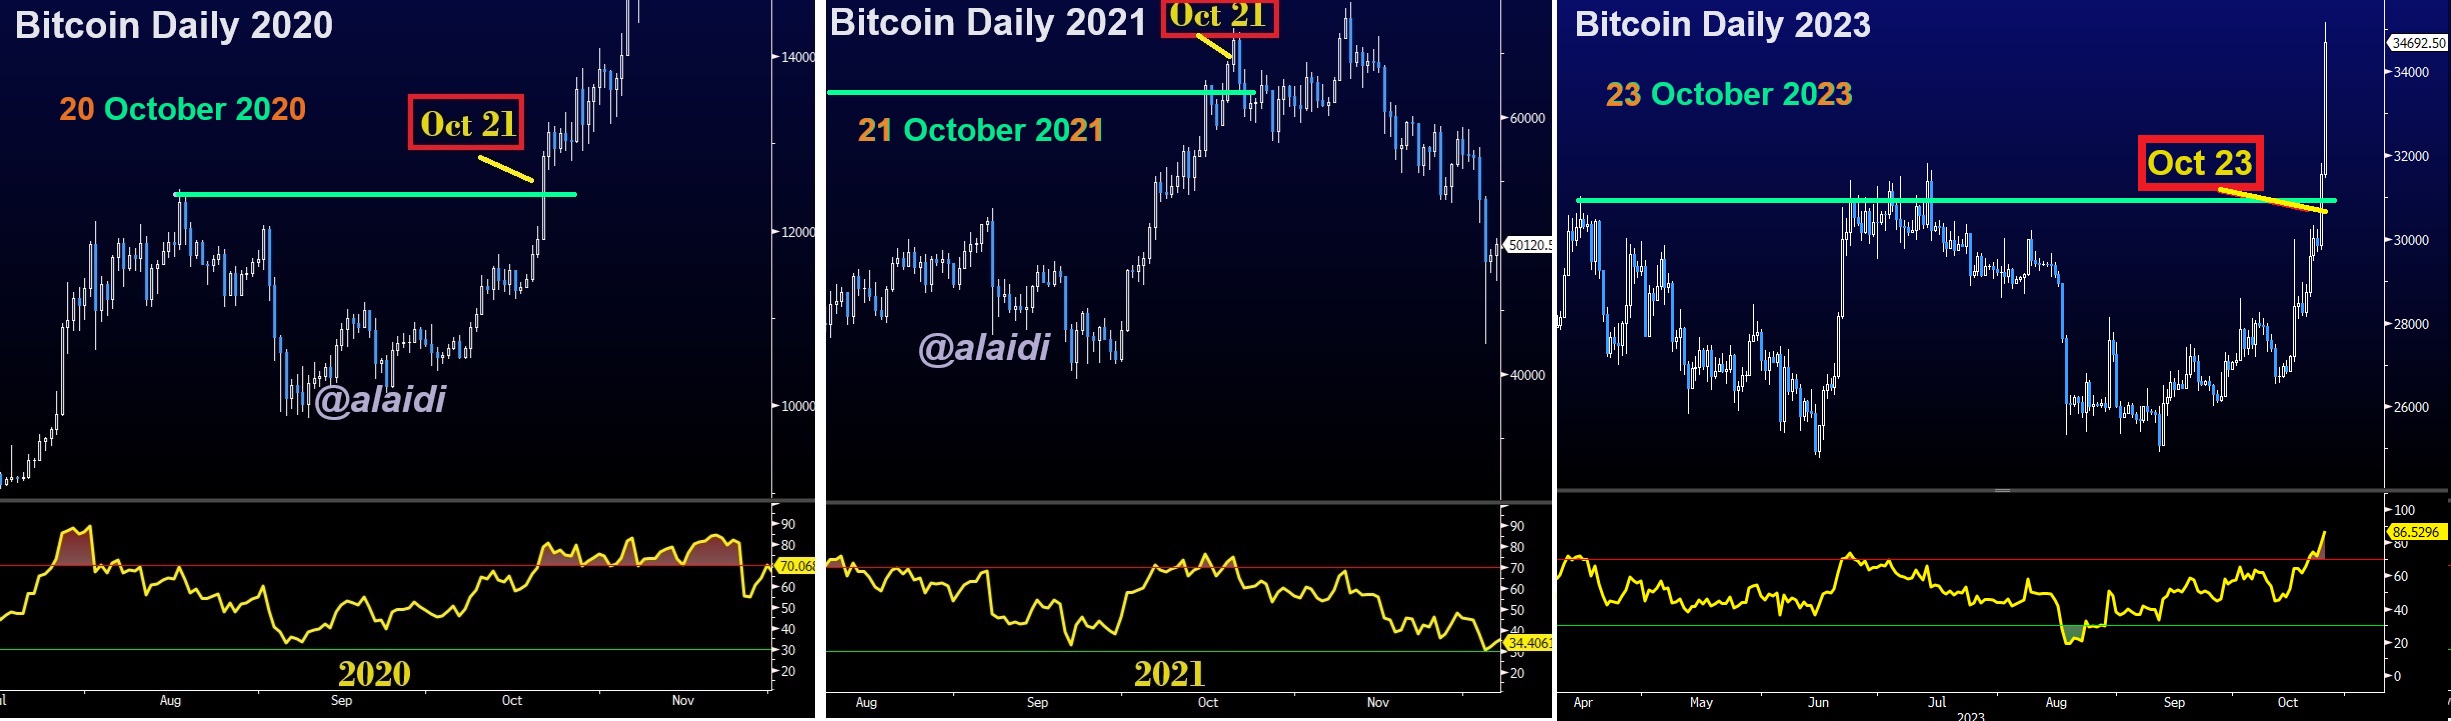 Bitcoin-Daily Chart-2020 to 2023